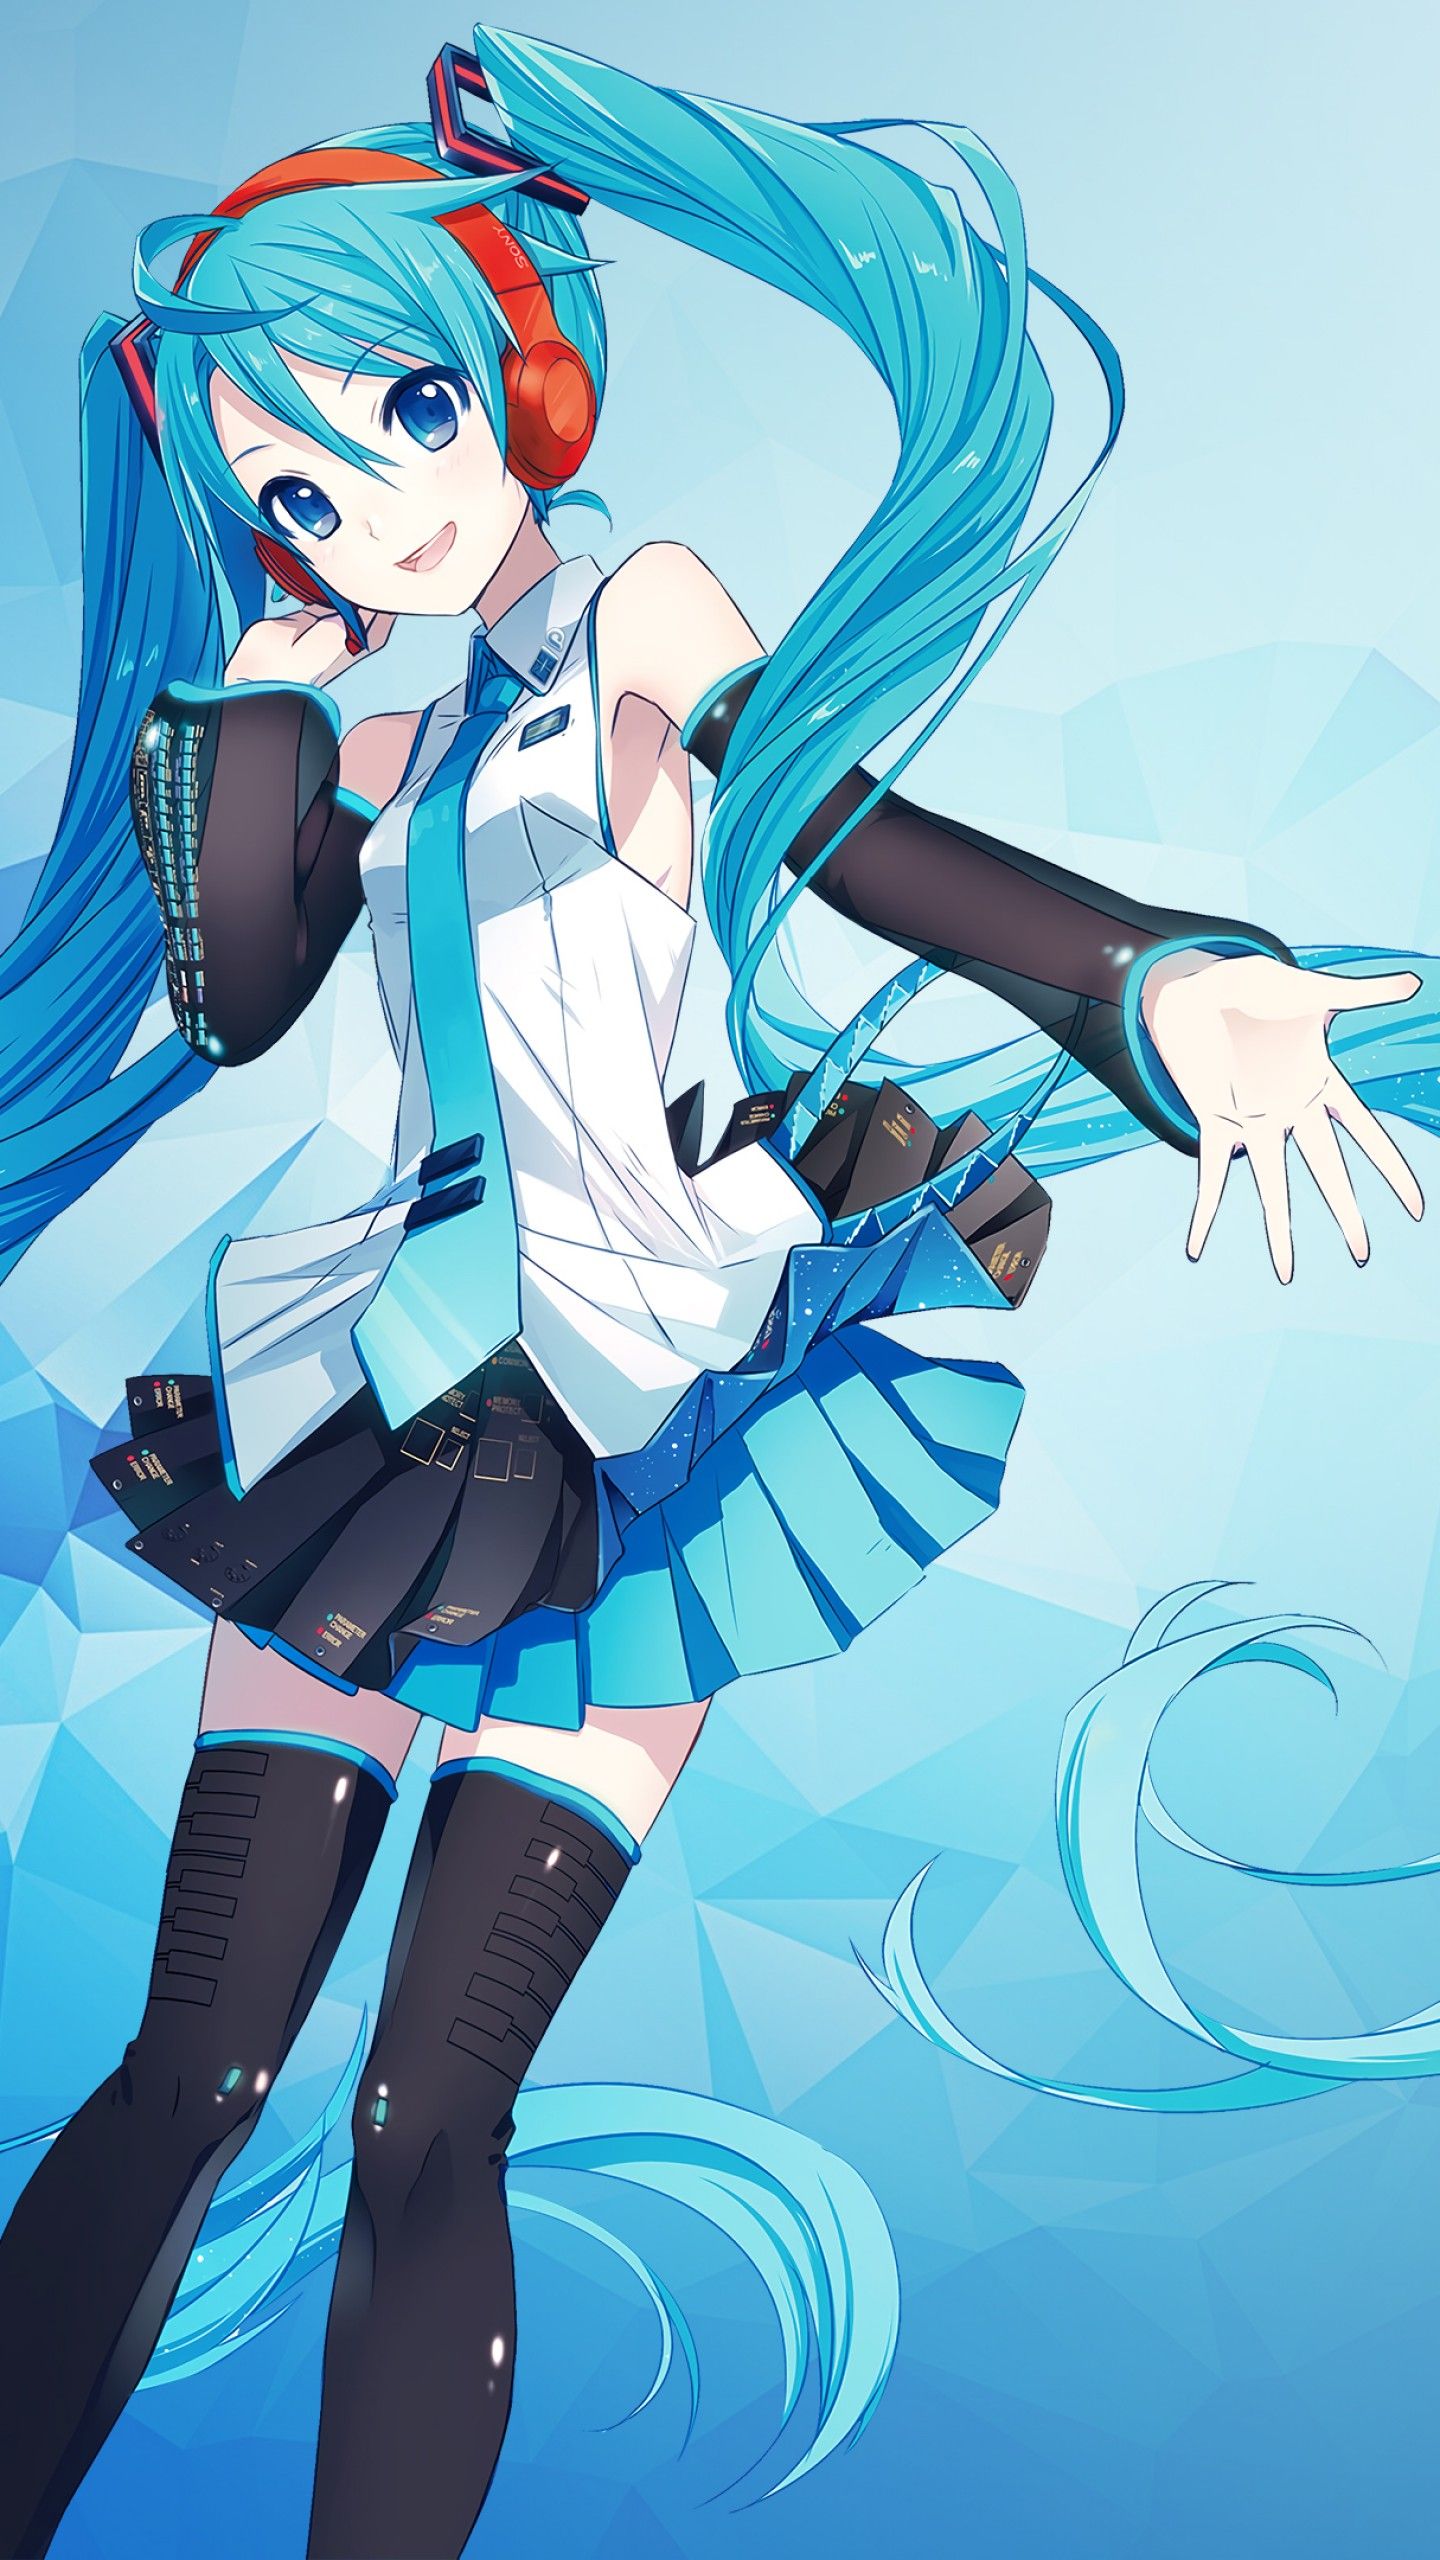 Wallpaper Hatsune Miku, Anime girl, Polygons, Blue, 4K, Anime / Most Popular,. Wallpaper for iPhone, Android, Mobile and Desktop